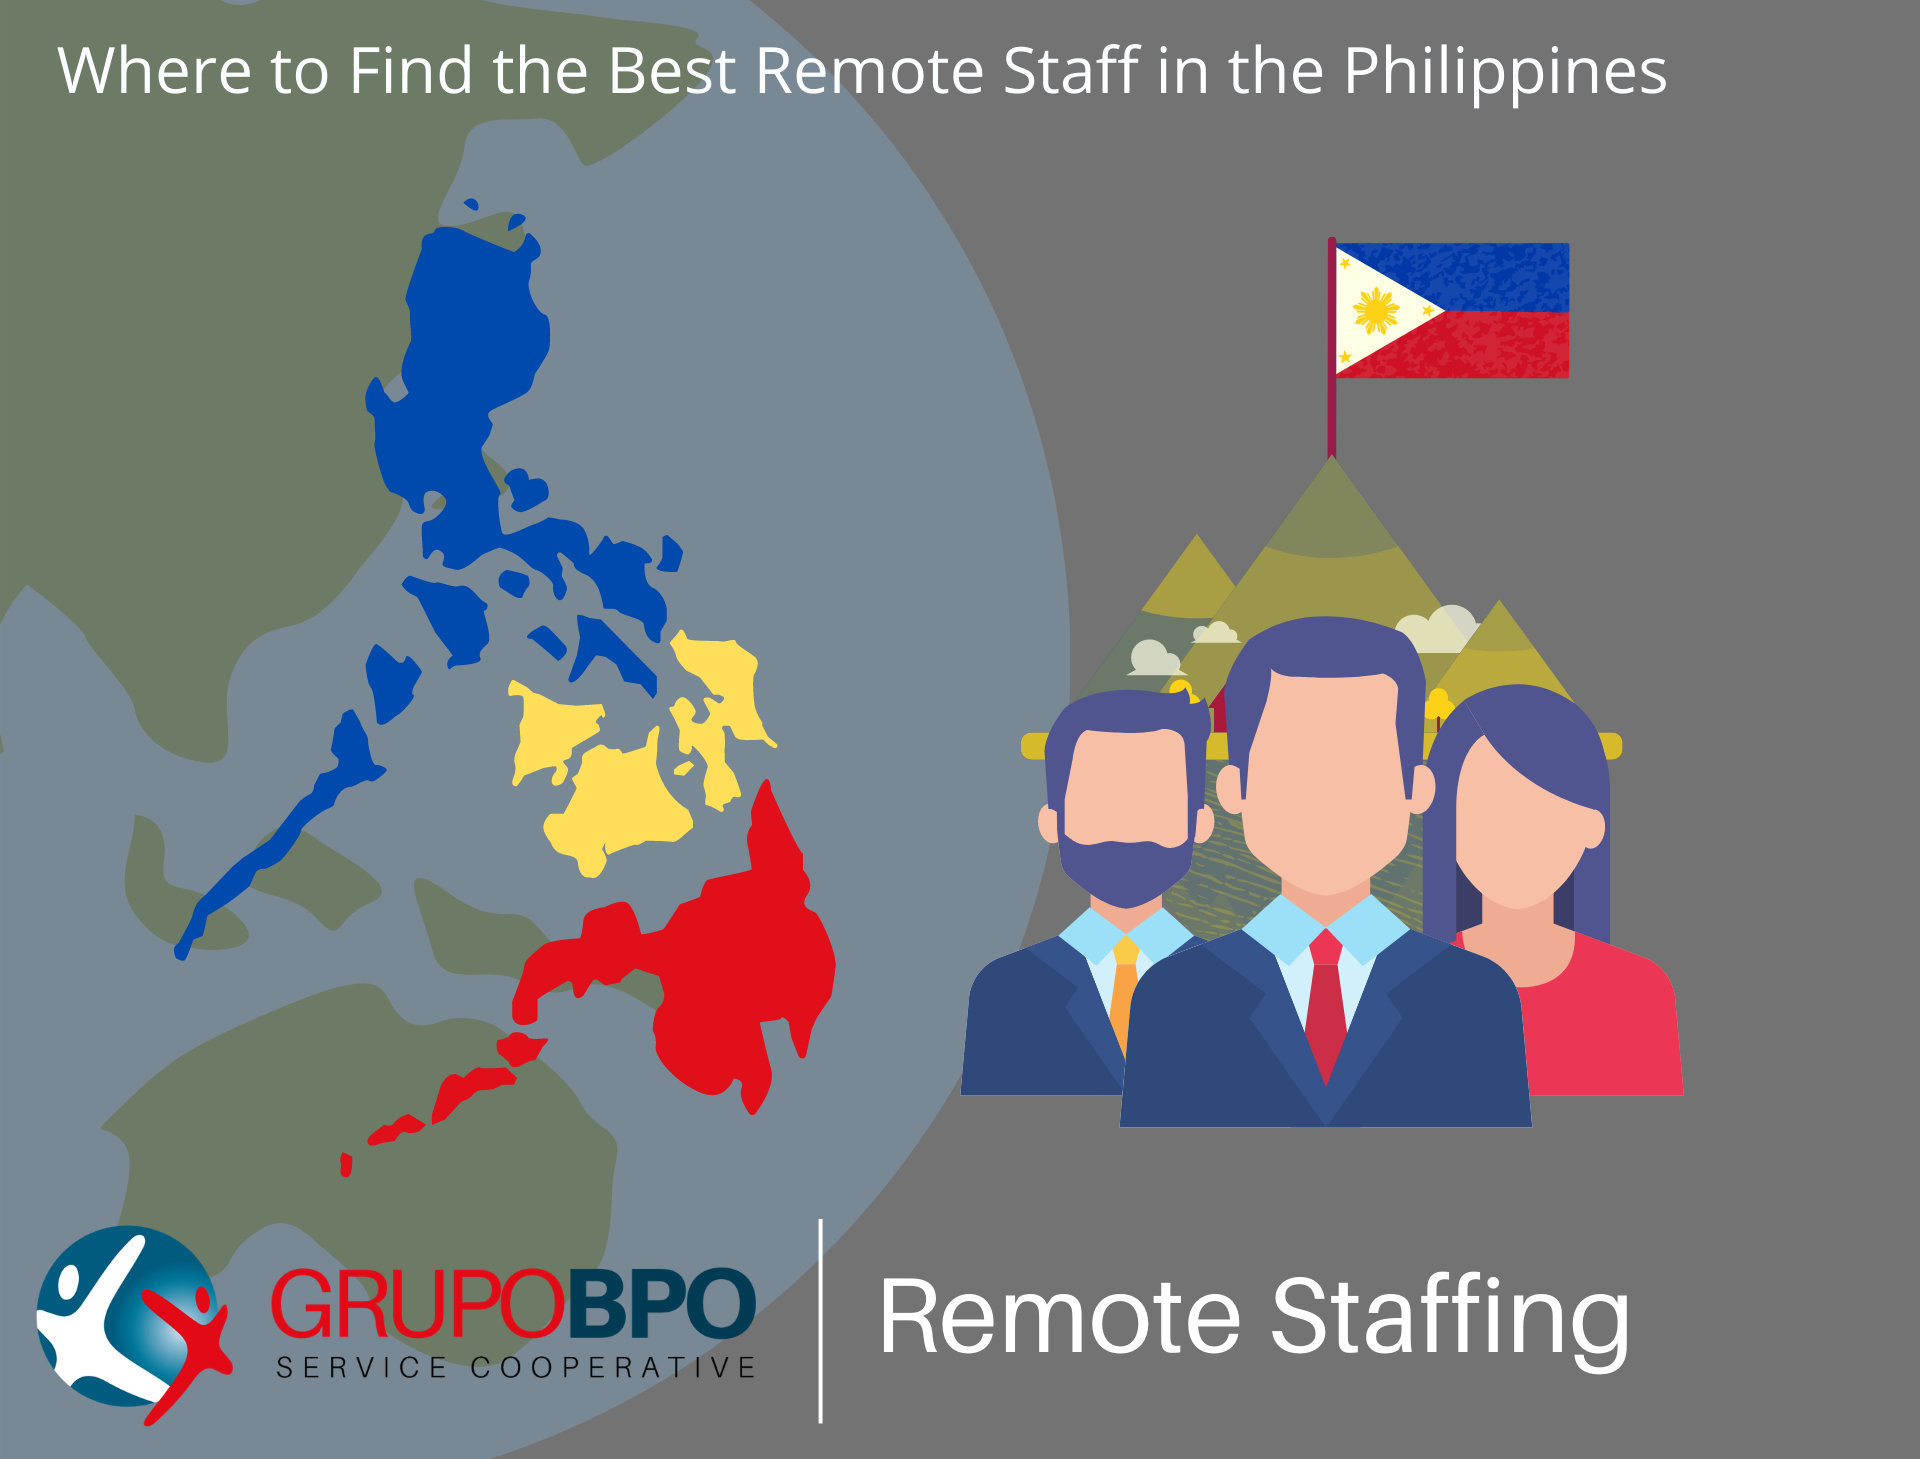 remote staff in the philippines- where to find the best